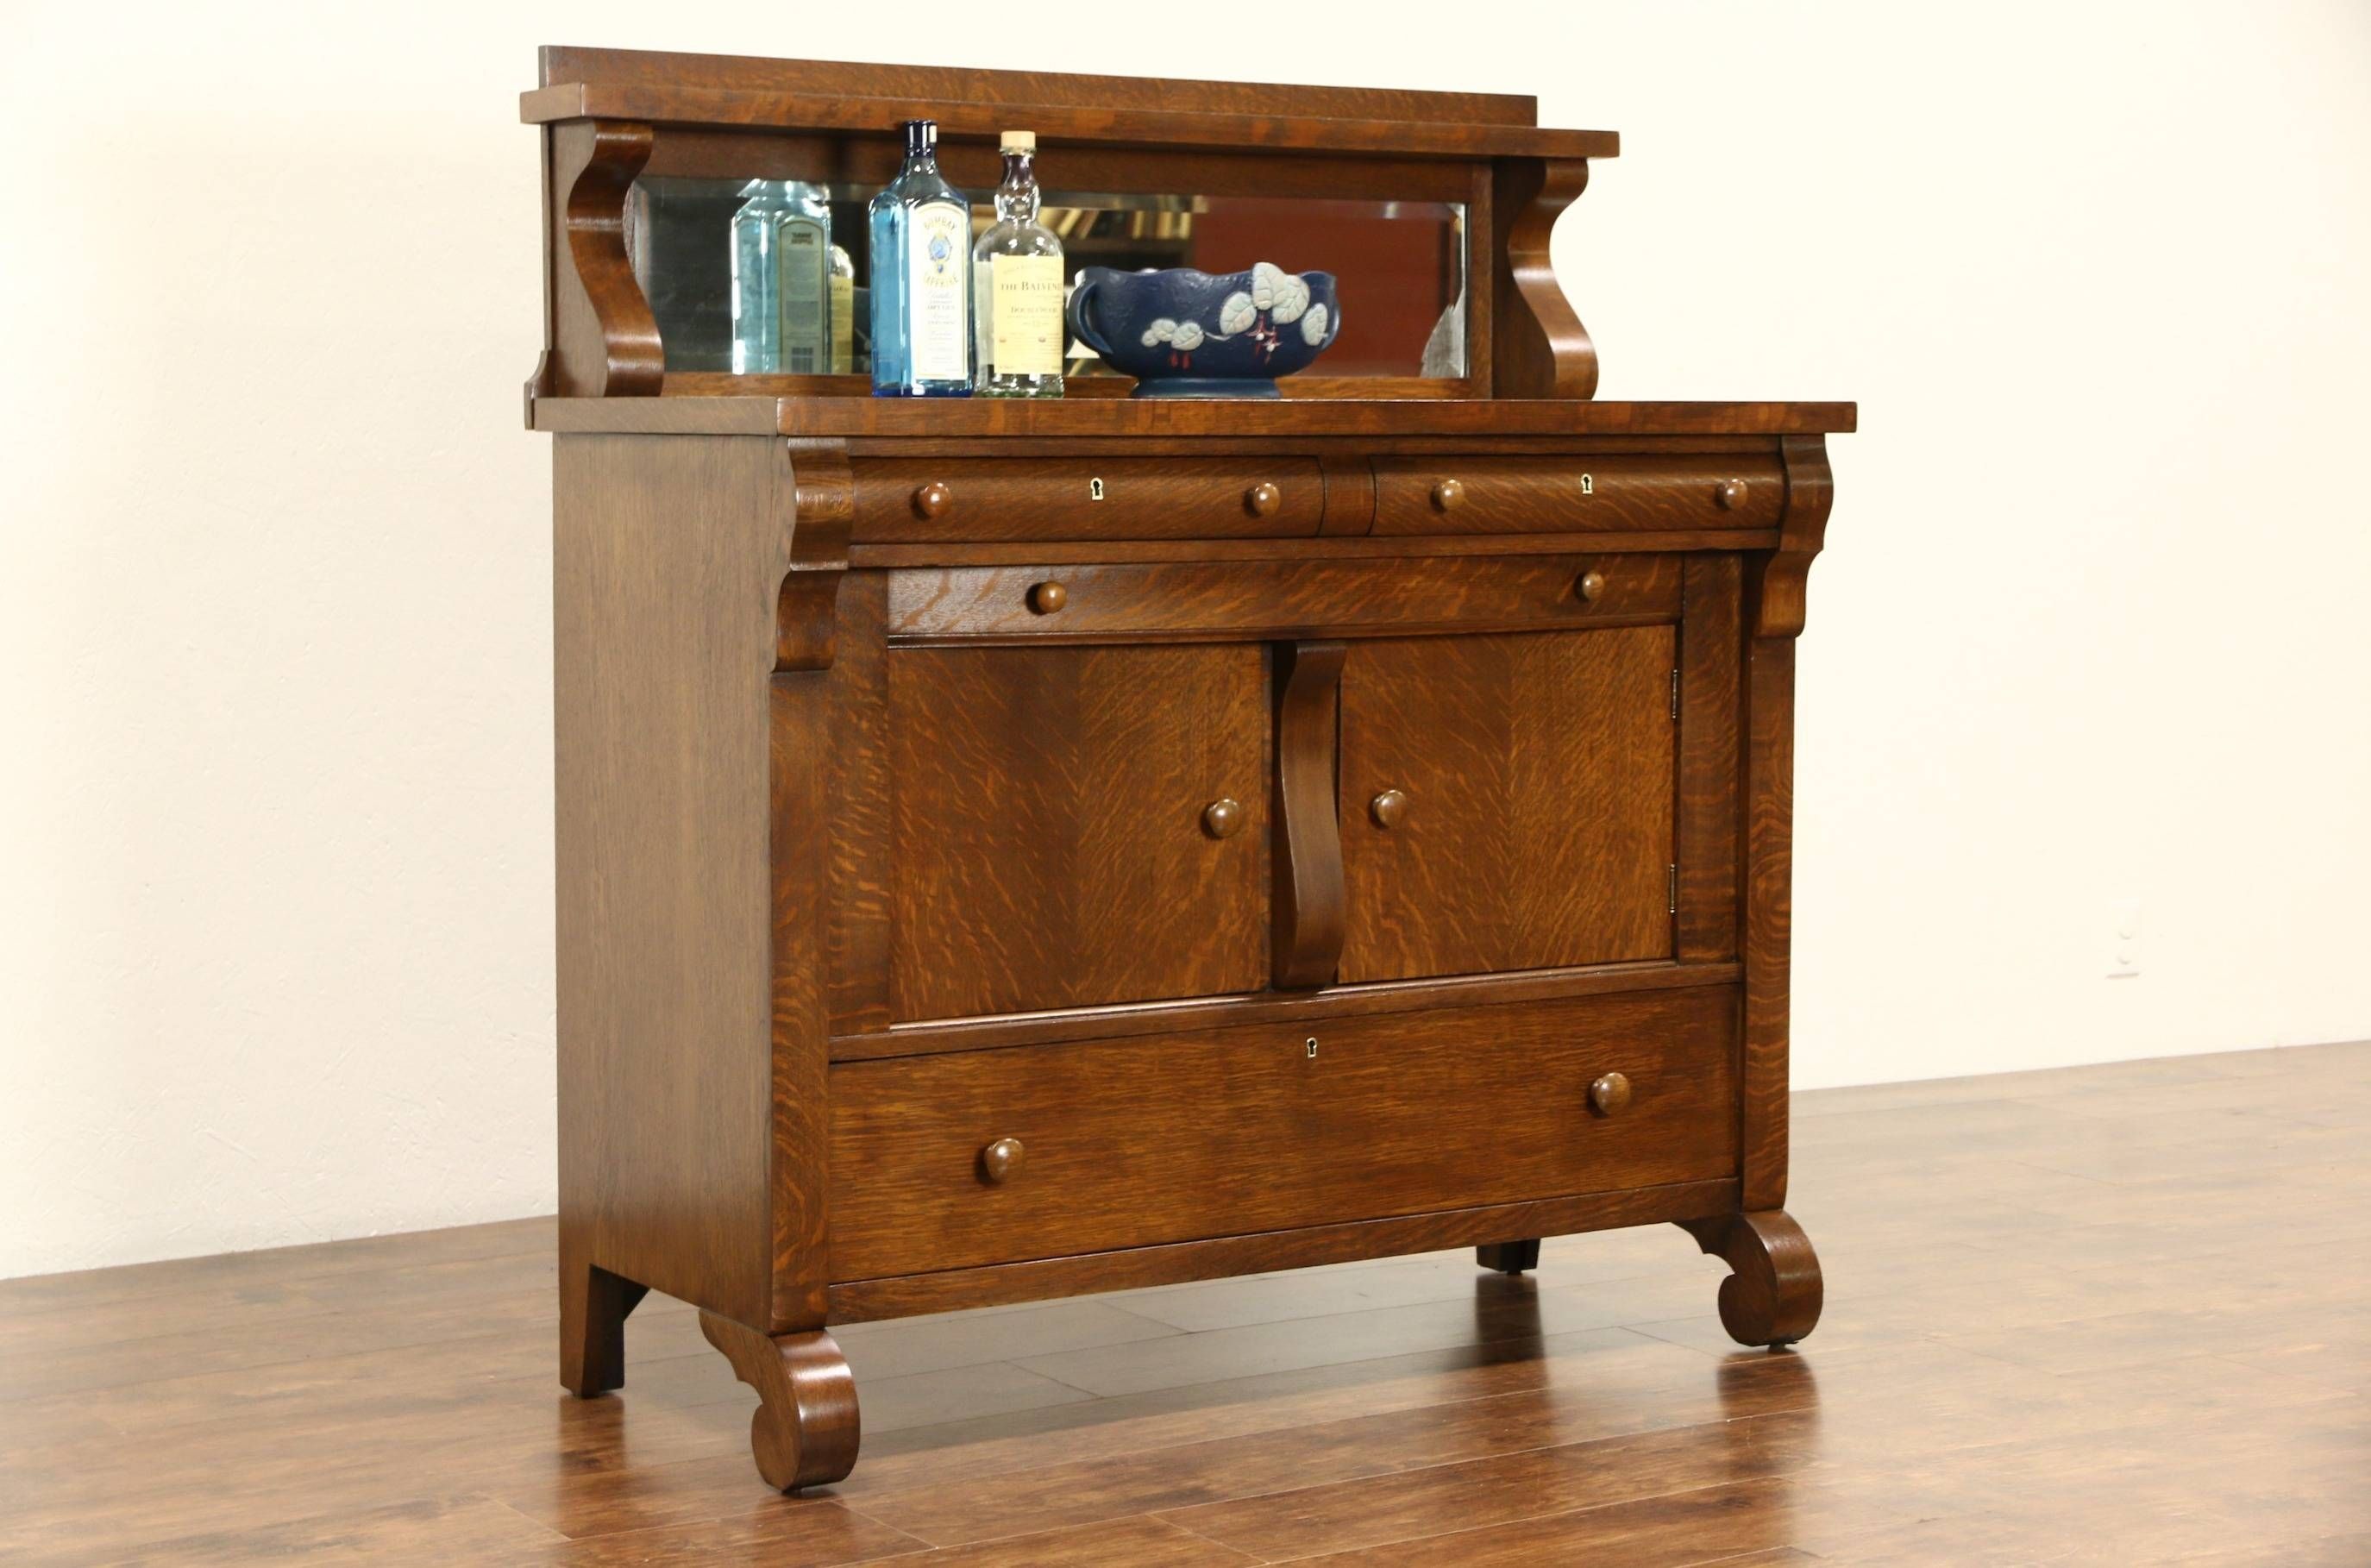 Popular Photo of Antique Sideboards With Mirror